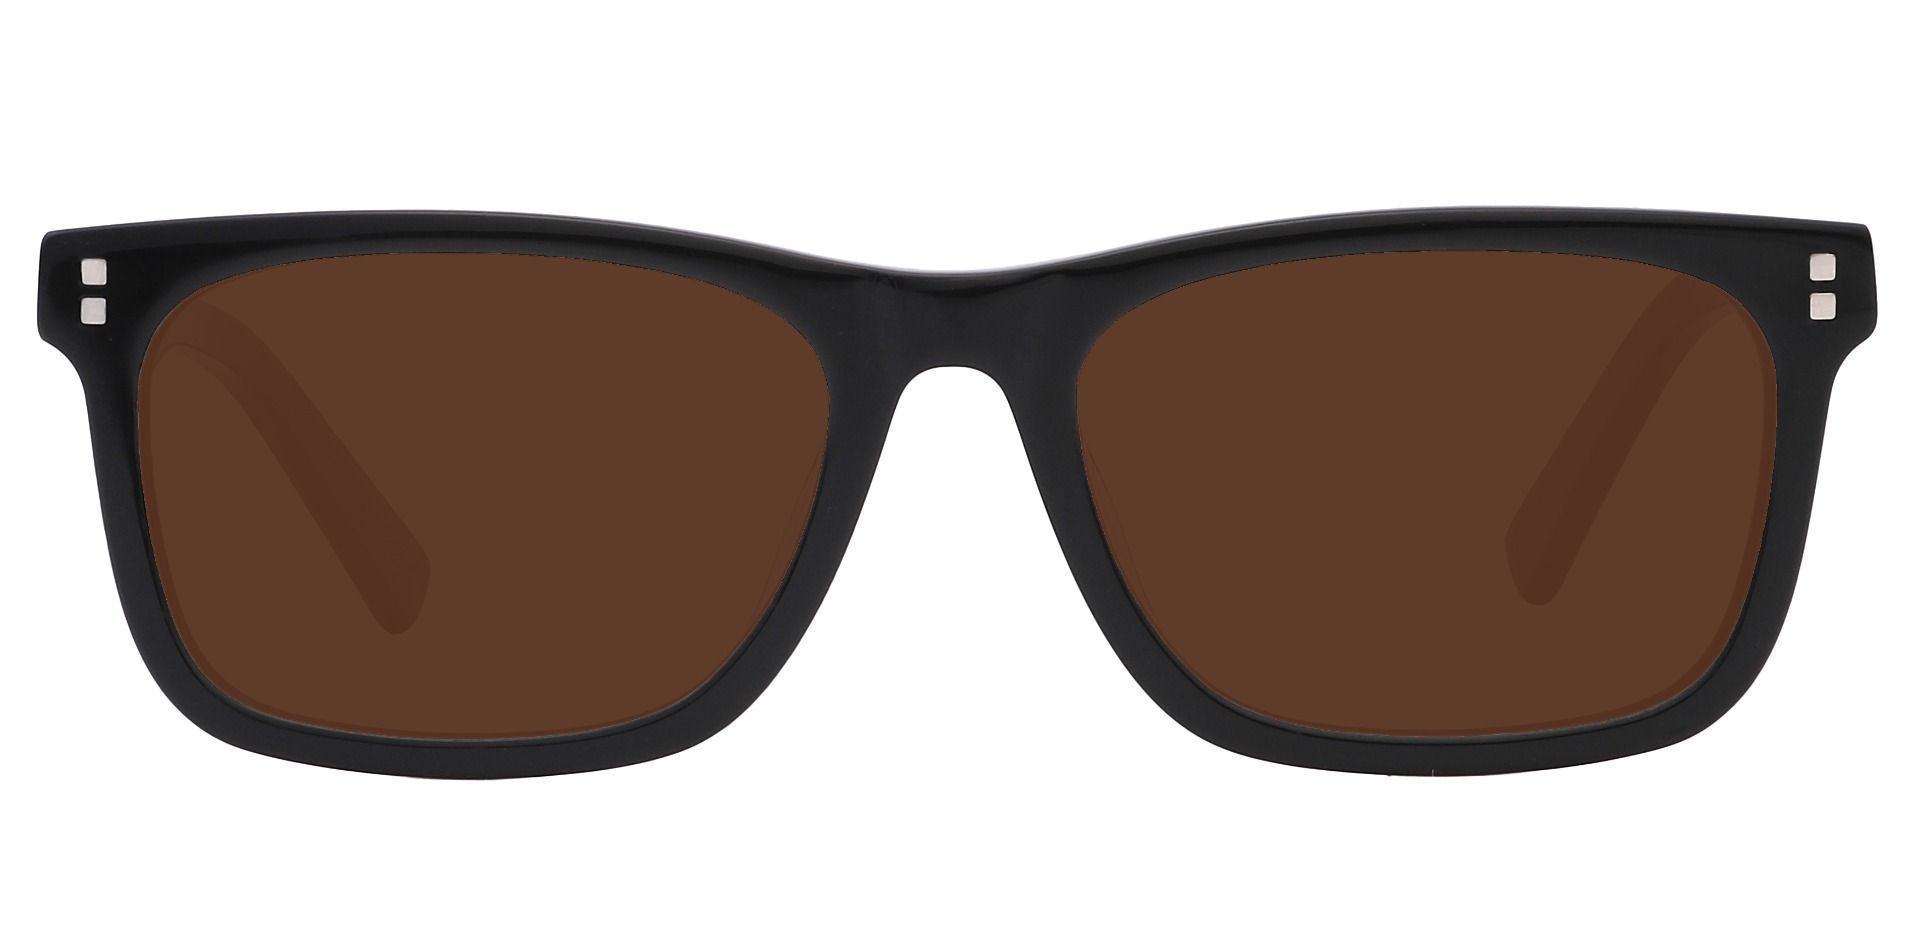 Liberty Rectangle Lined Bifocal Sunglasses - Black Frame With Brown Lenses